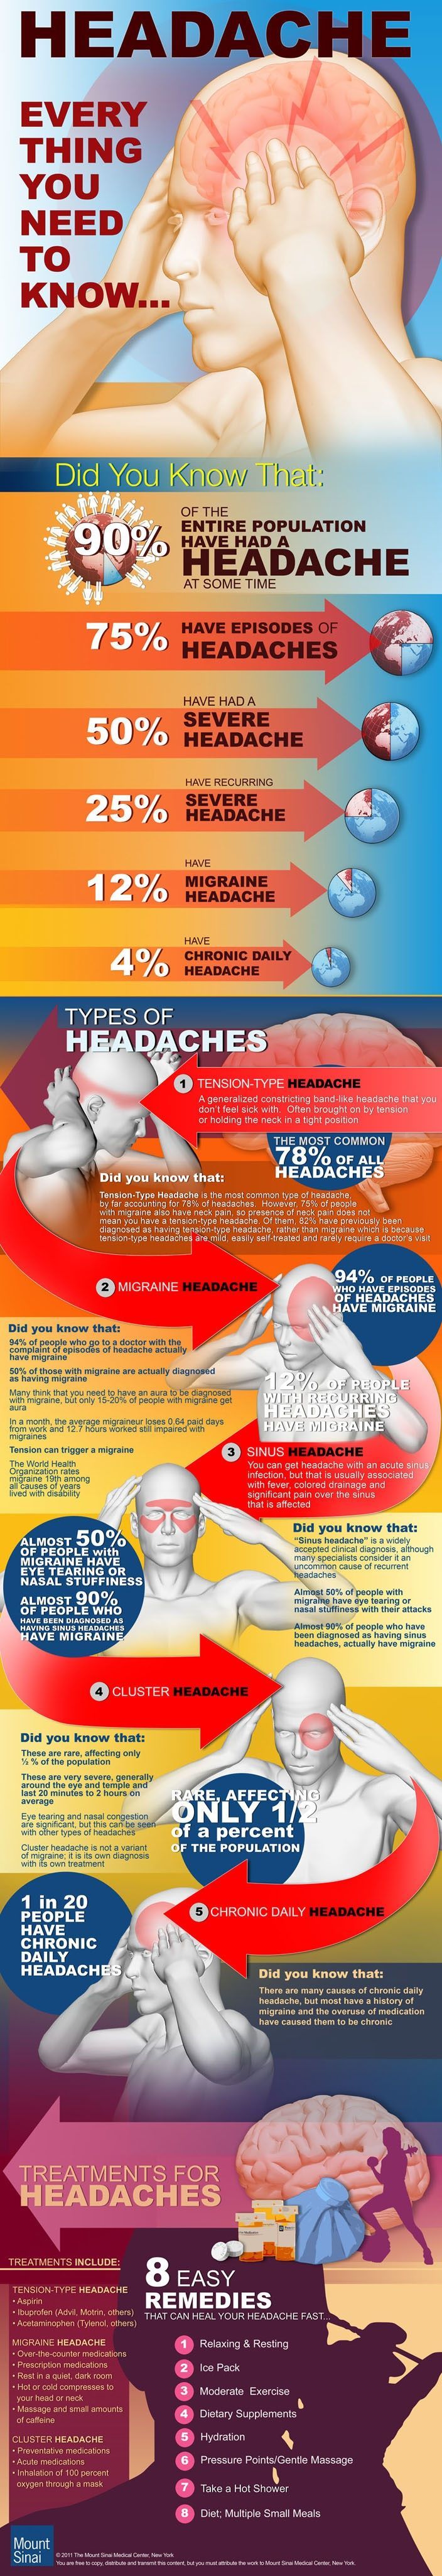 Exercise is a great way to cure headaches